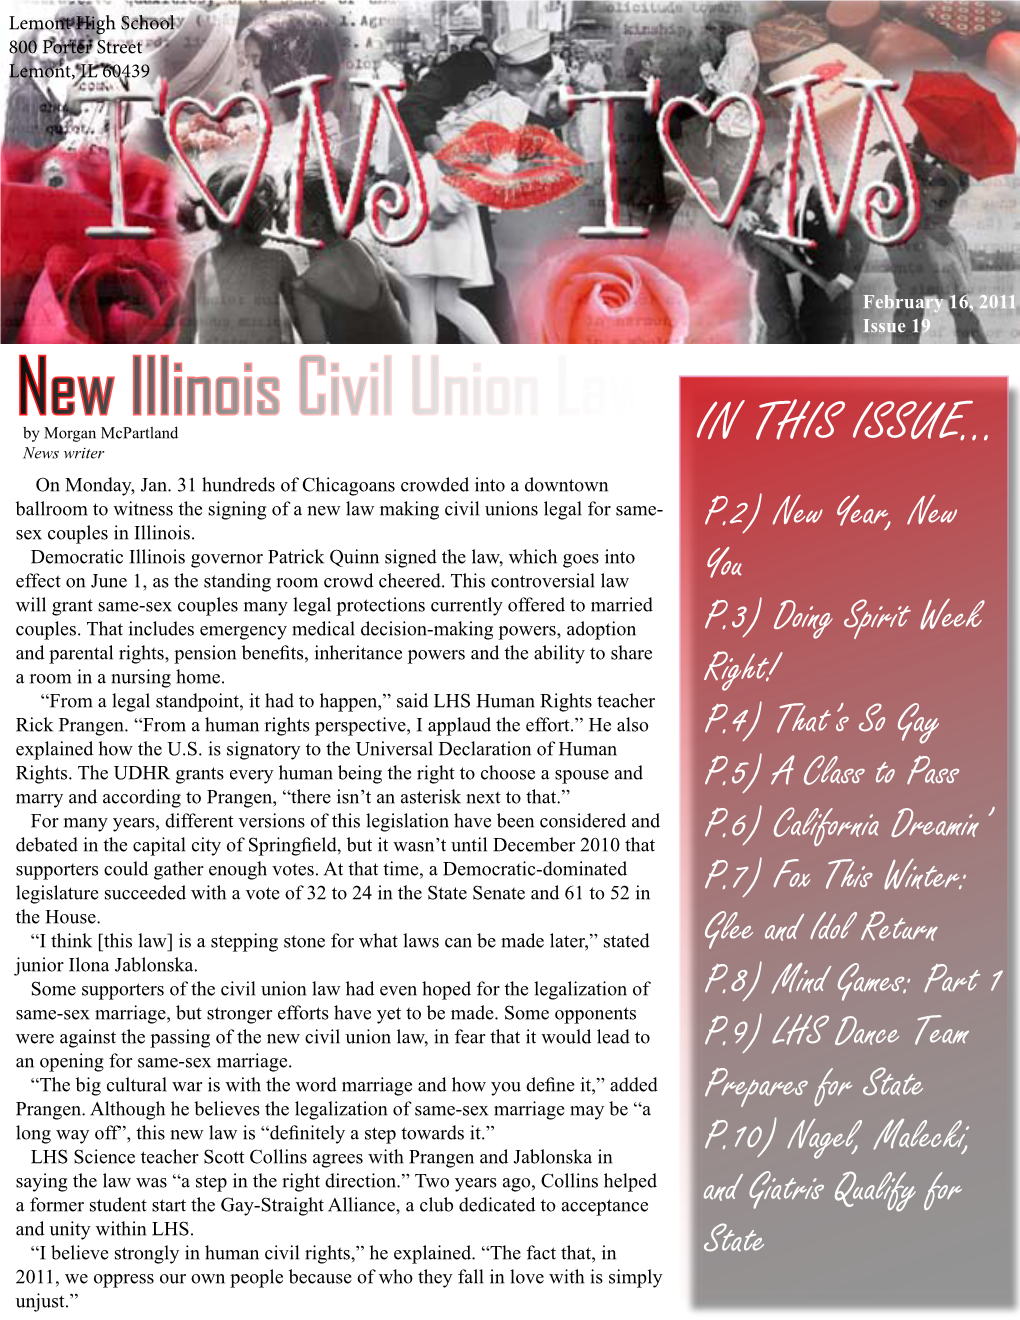 New Illinois Civil Union Law by Morgan Mcpartland in THIS ISSUE